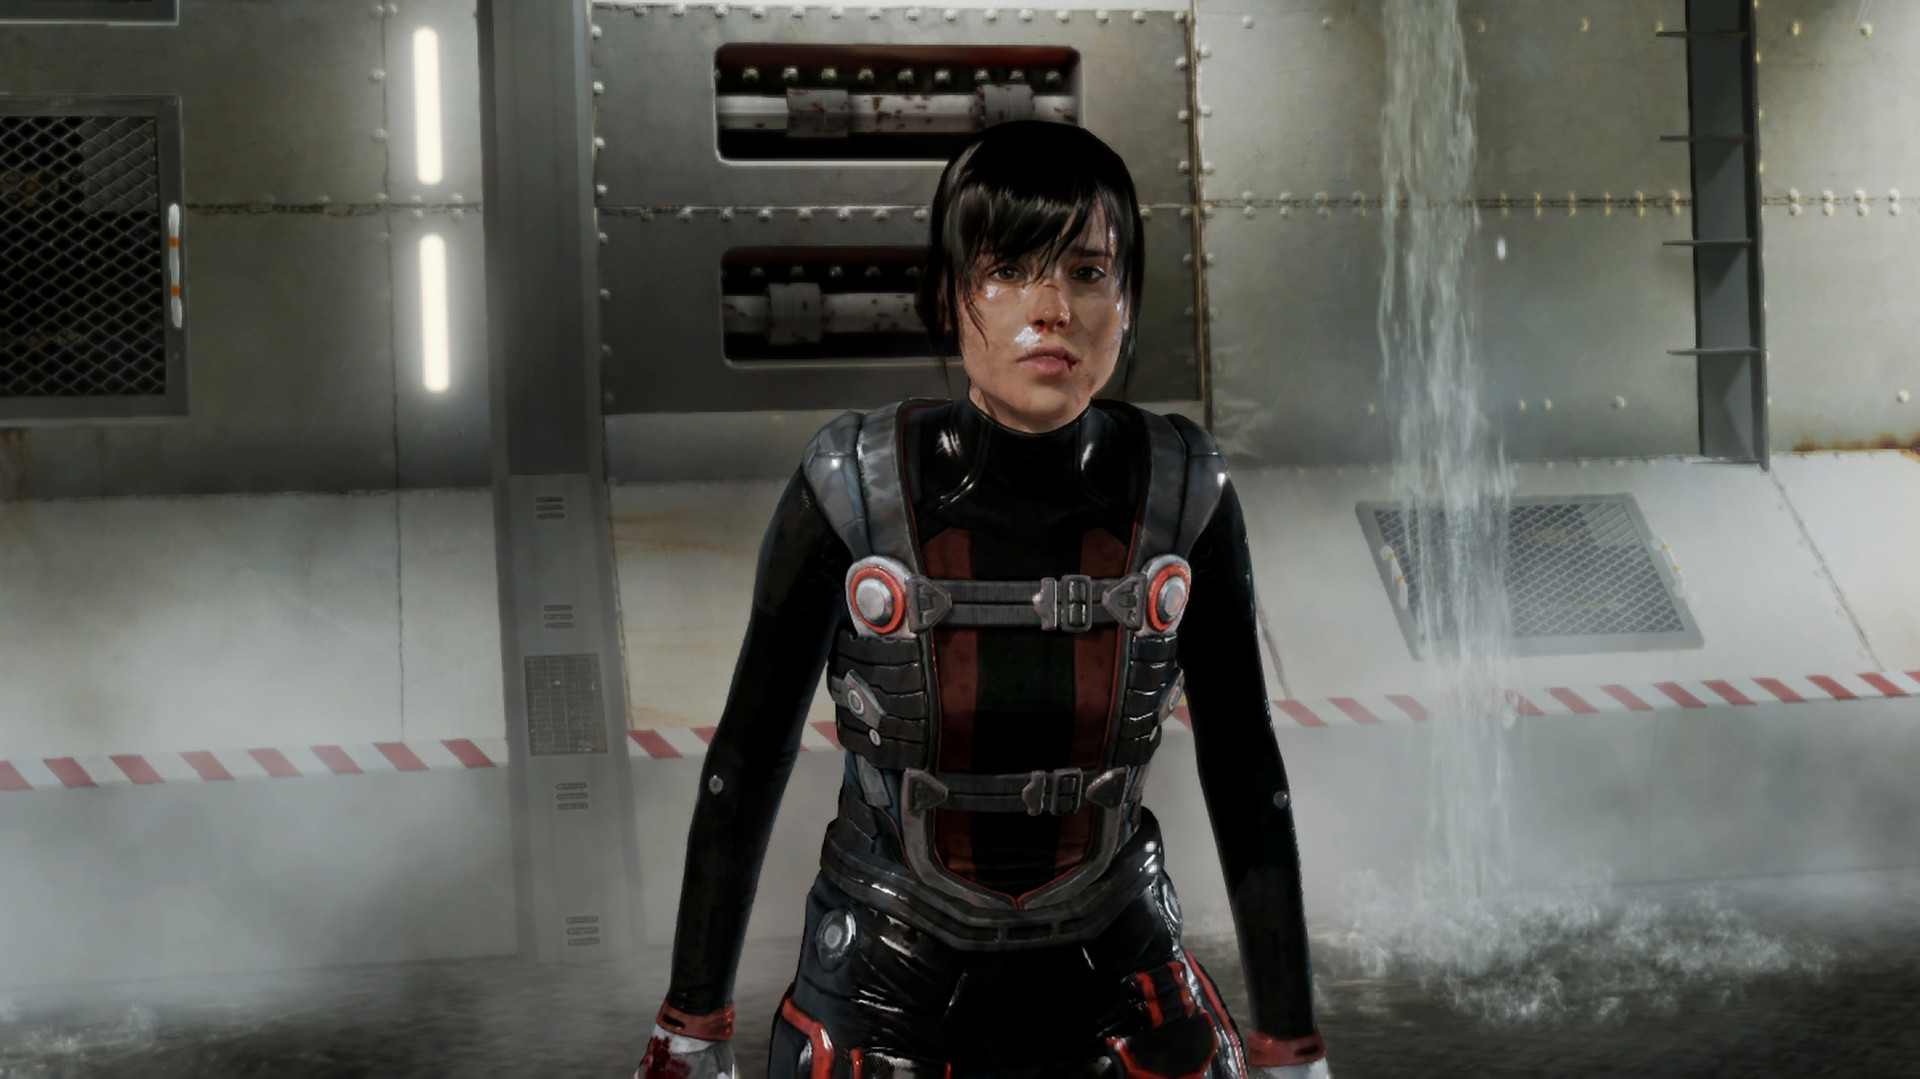 Save 50% on Beyond: Two Souls on Steam